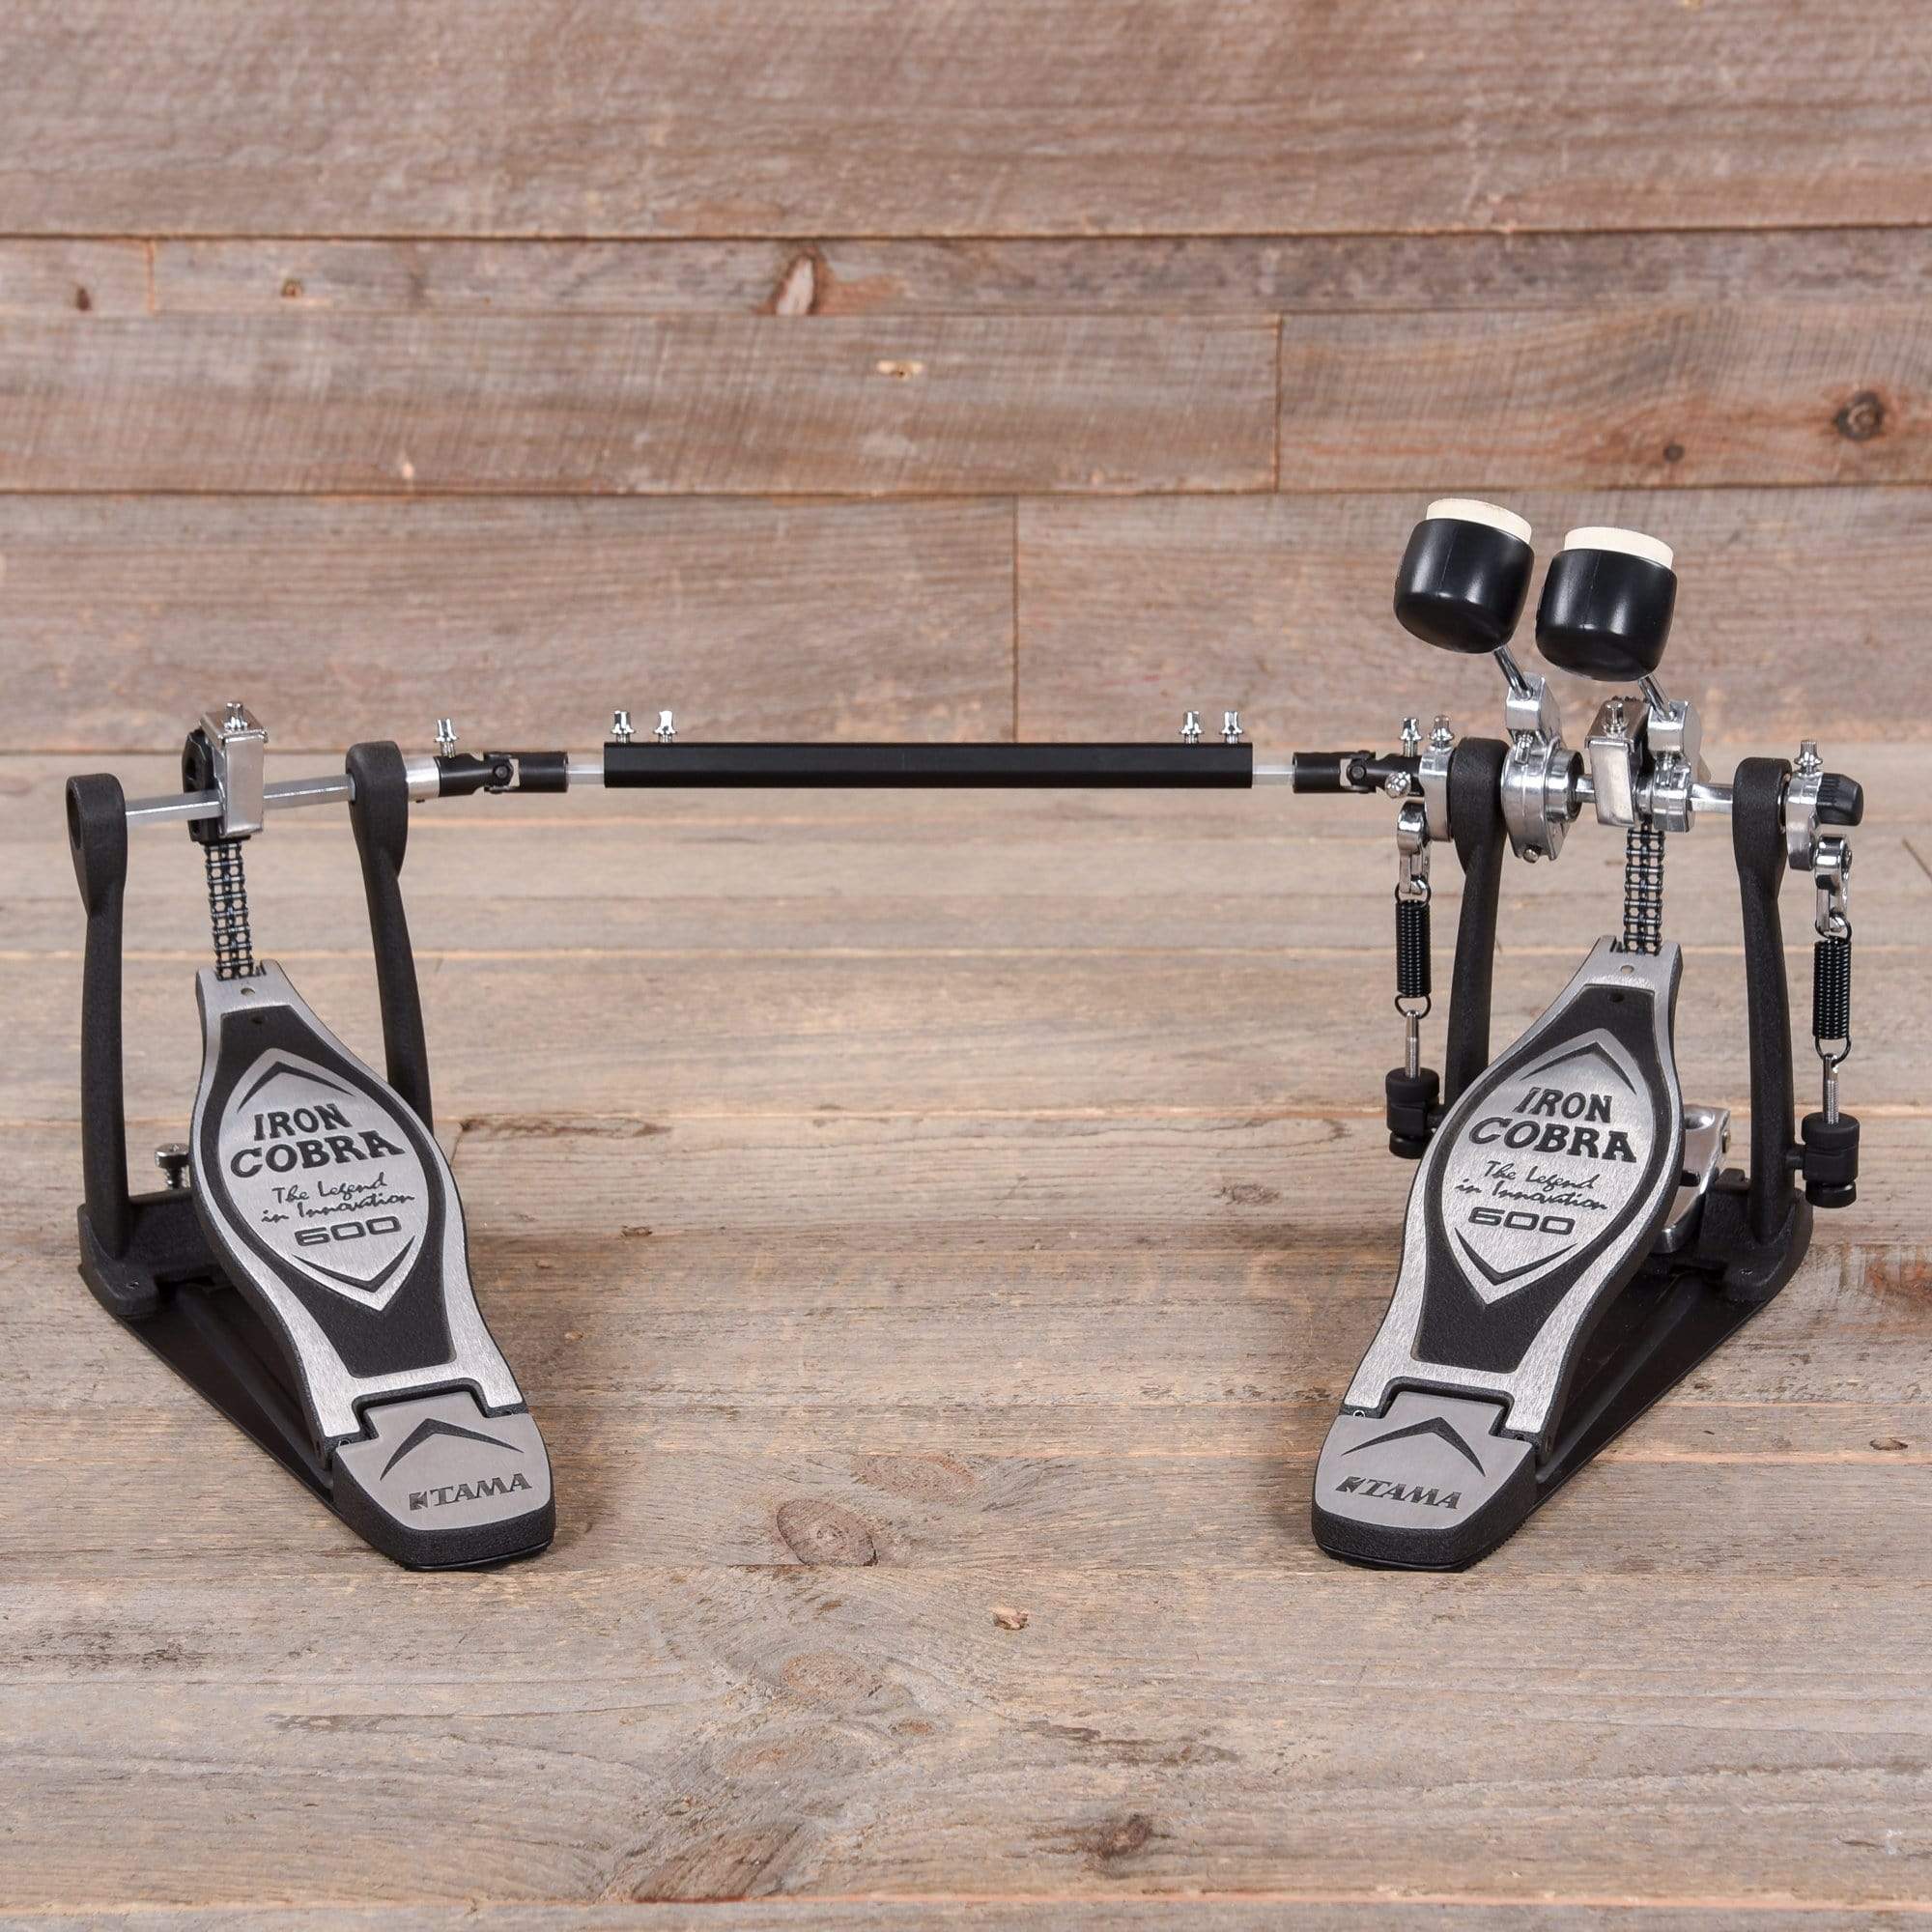 Tama Iron Cobra 600 Duo Glide Double Bass Drum Pedal – Chicago